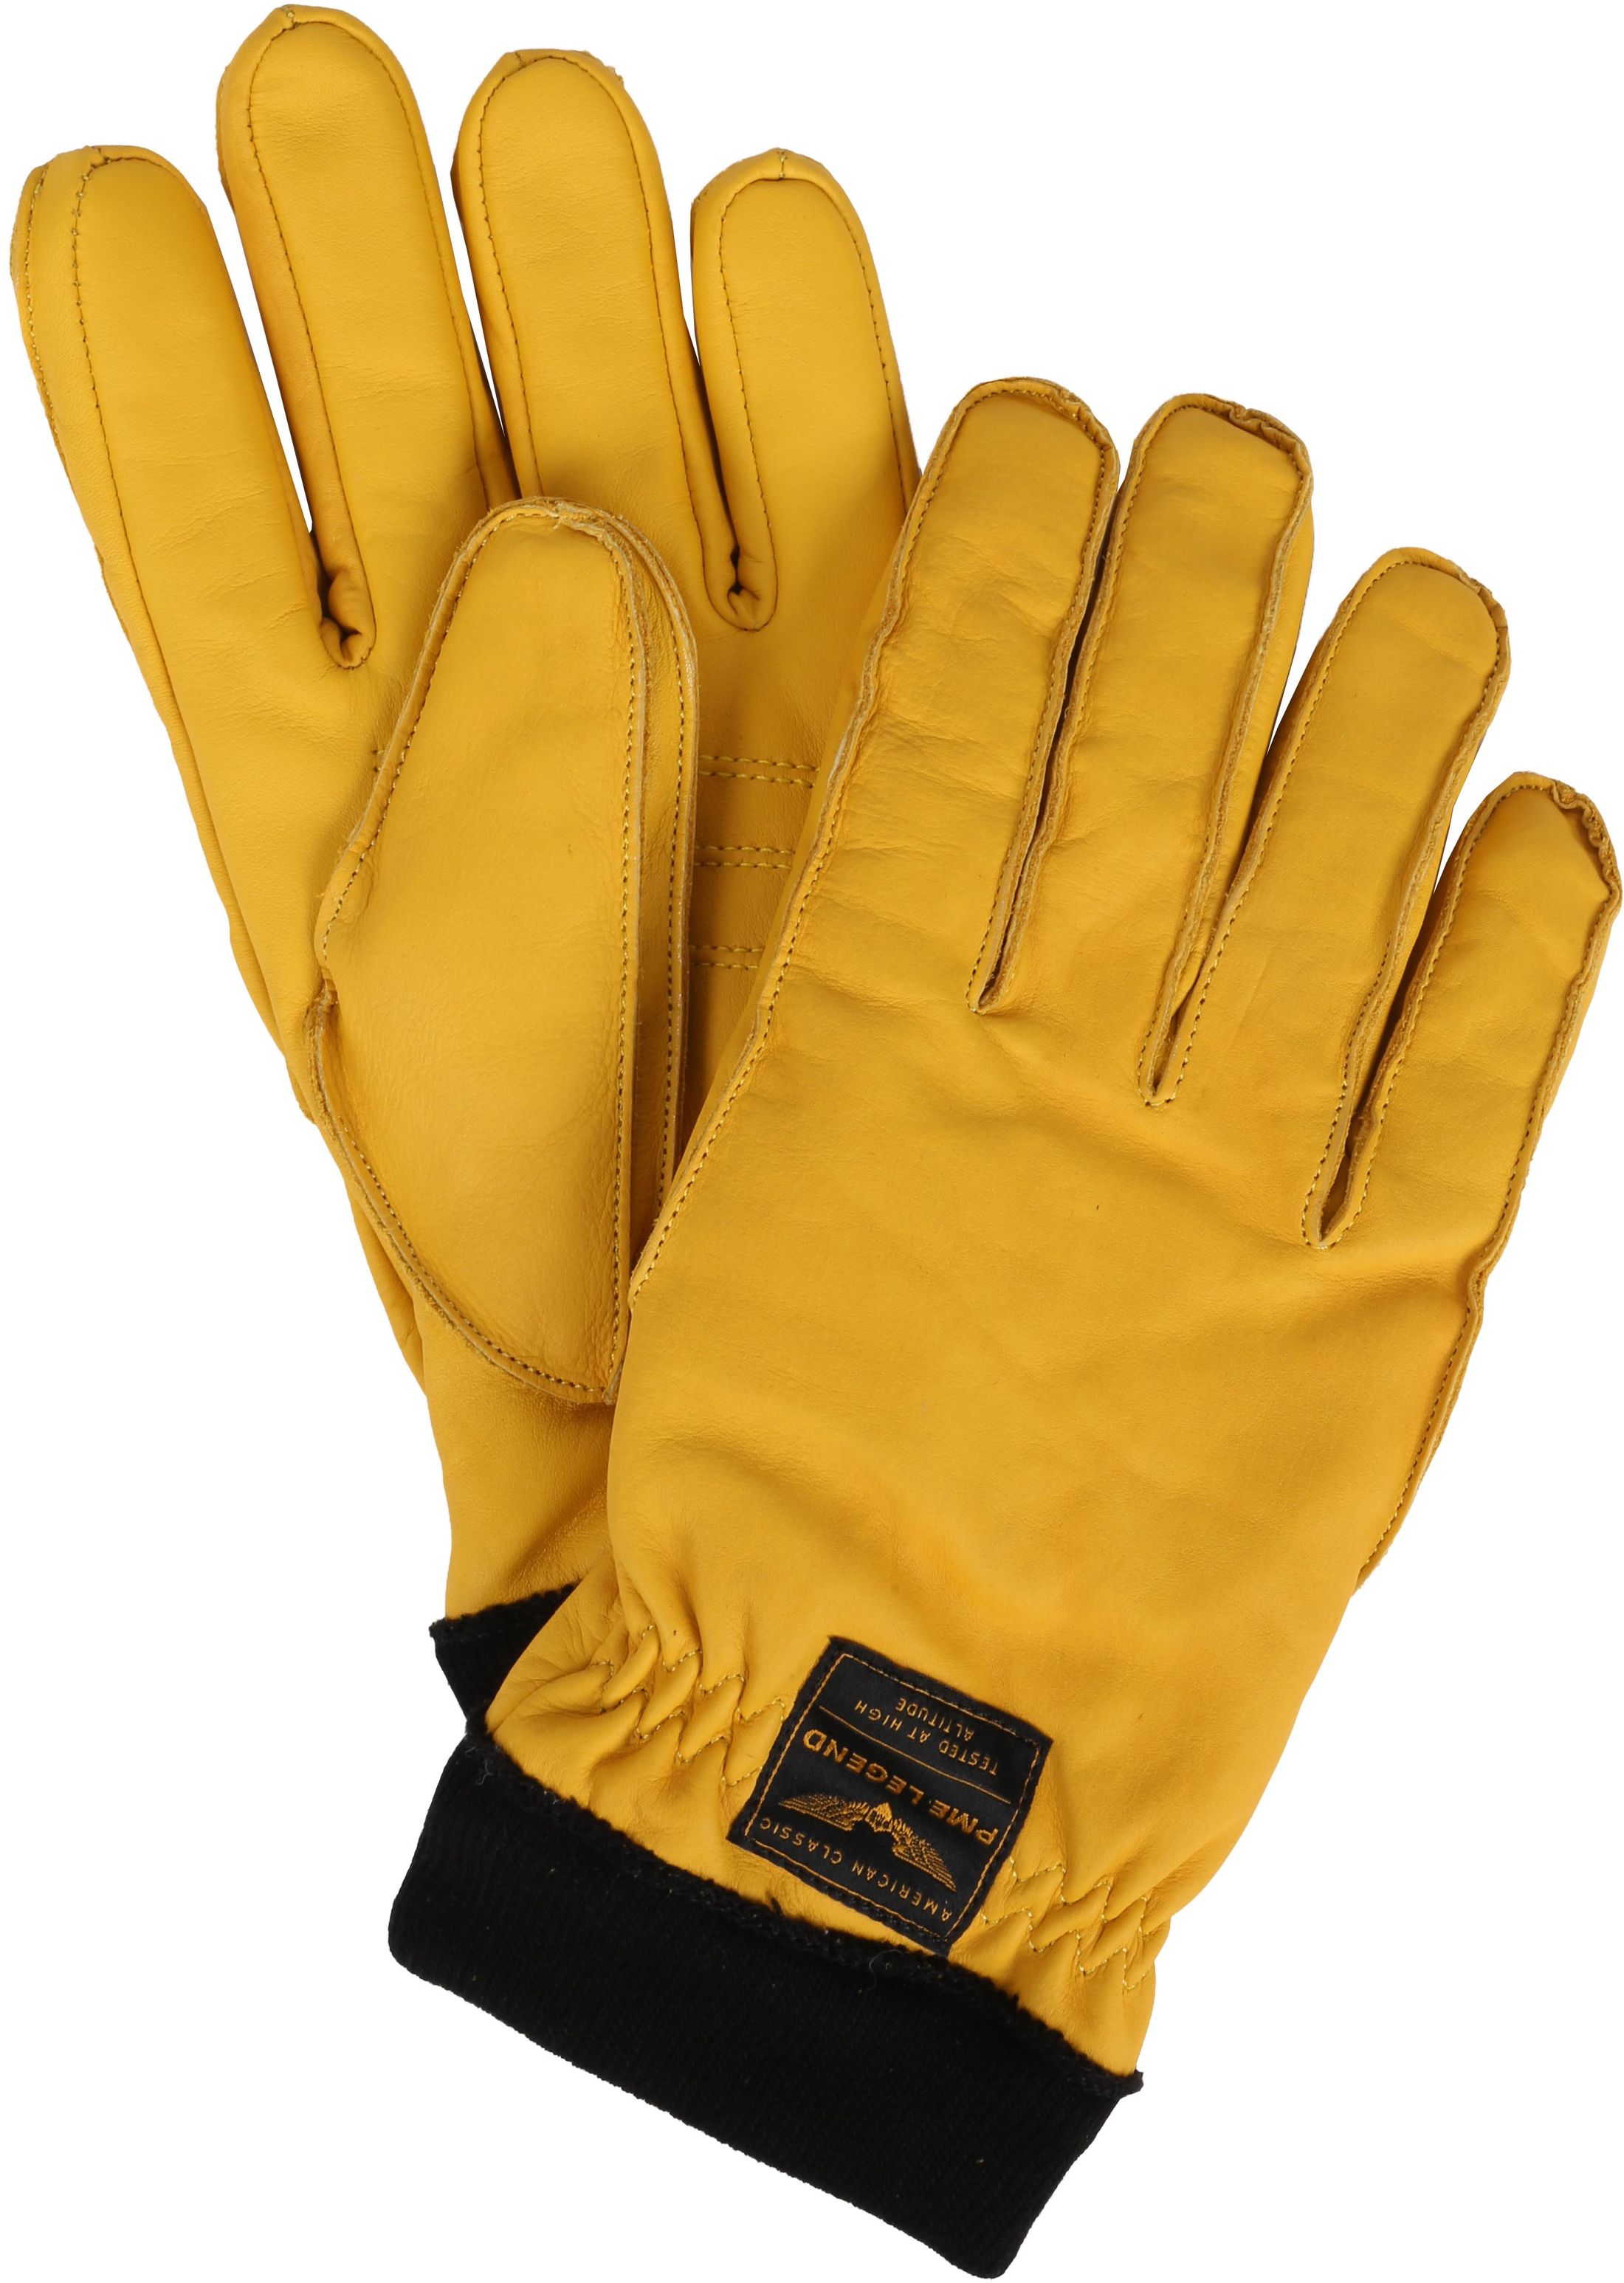 PME Legend Leather Gloves Yellow size M/L